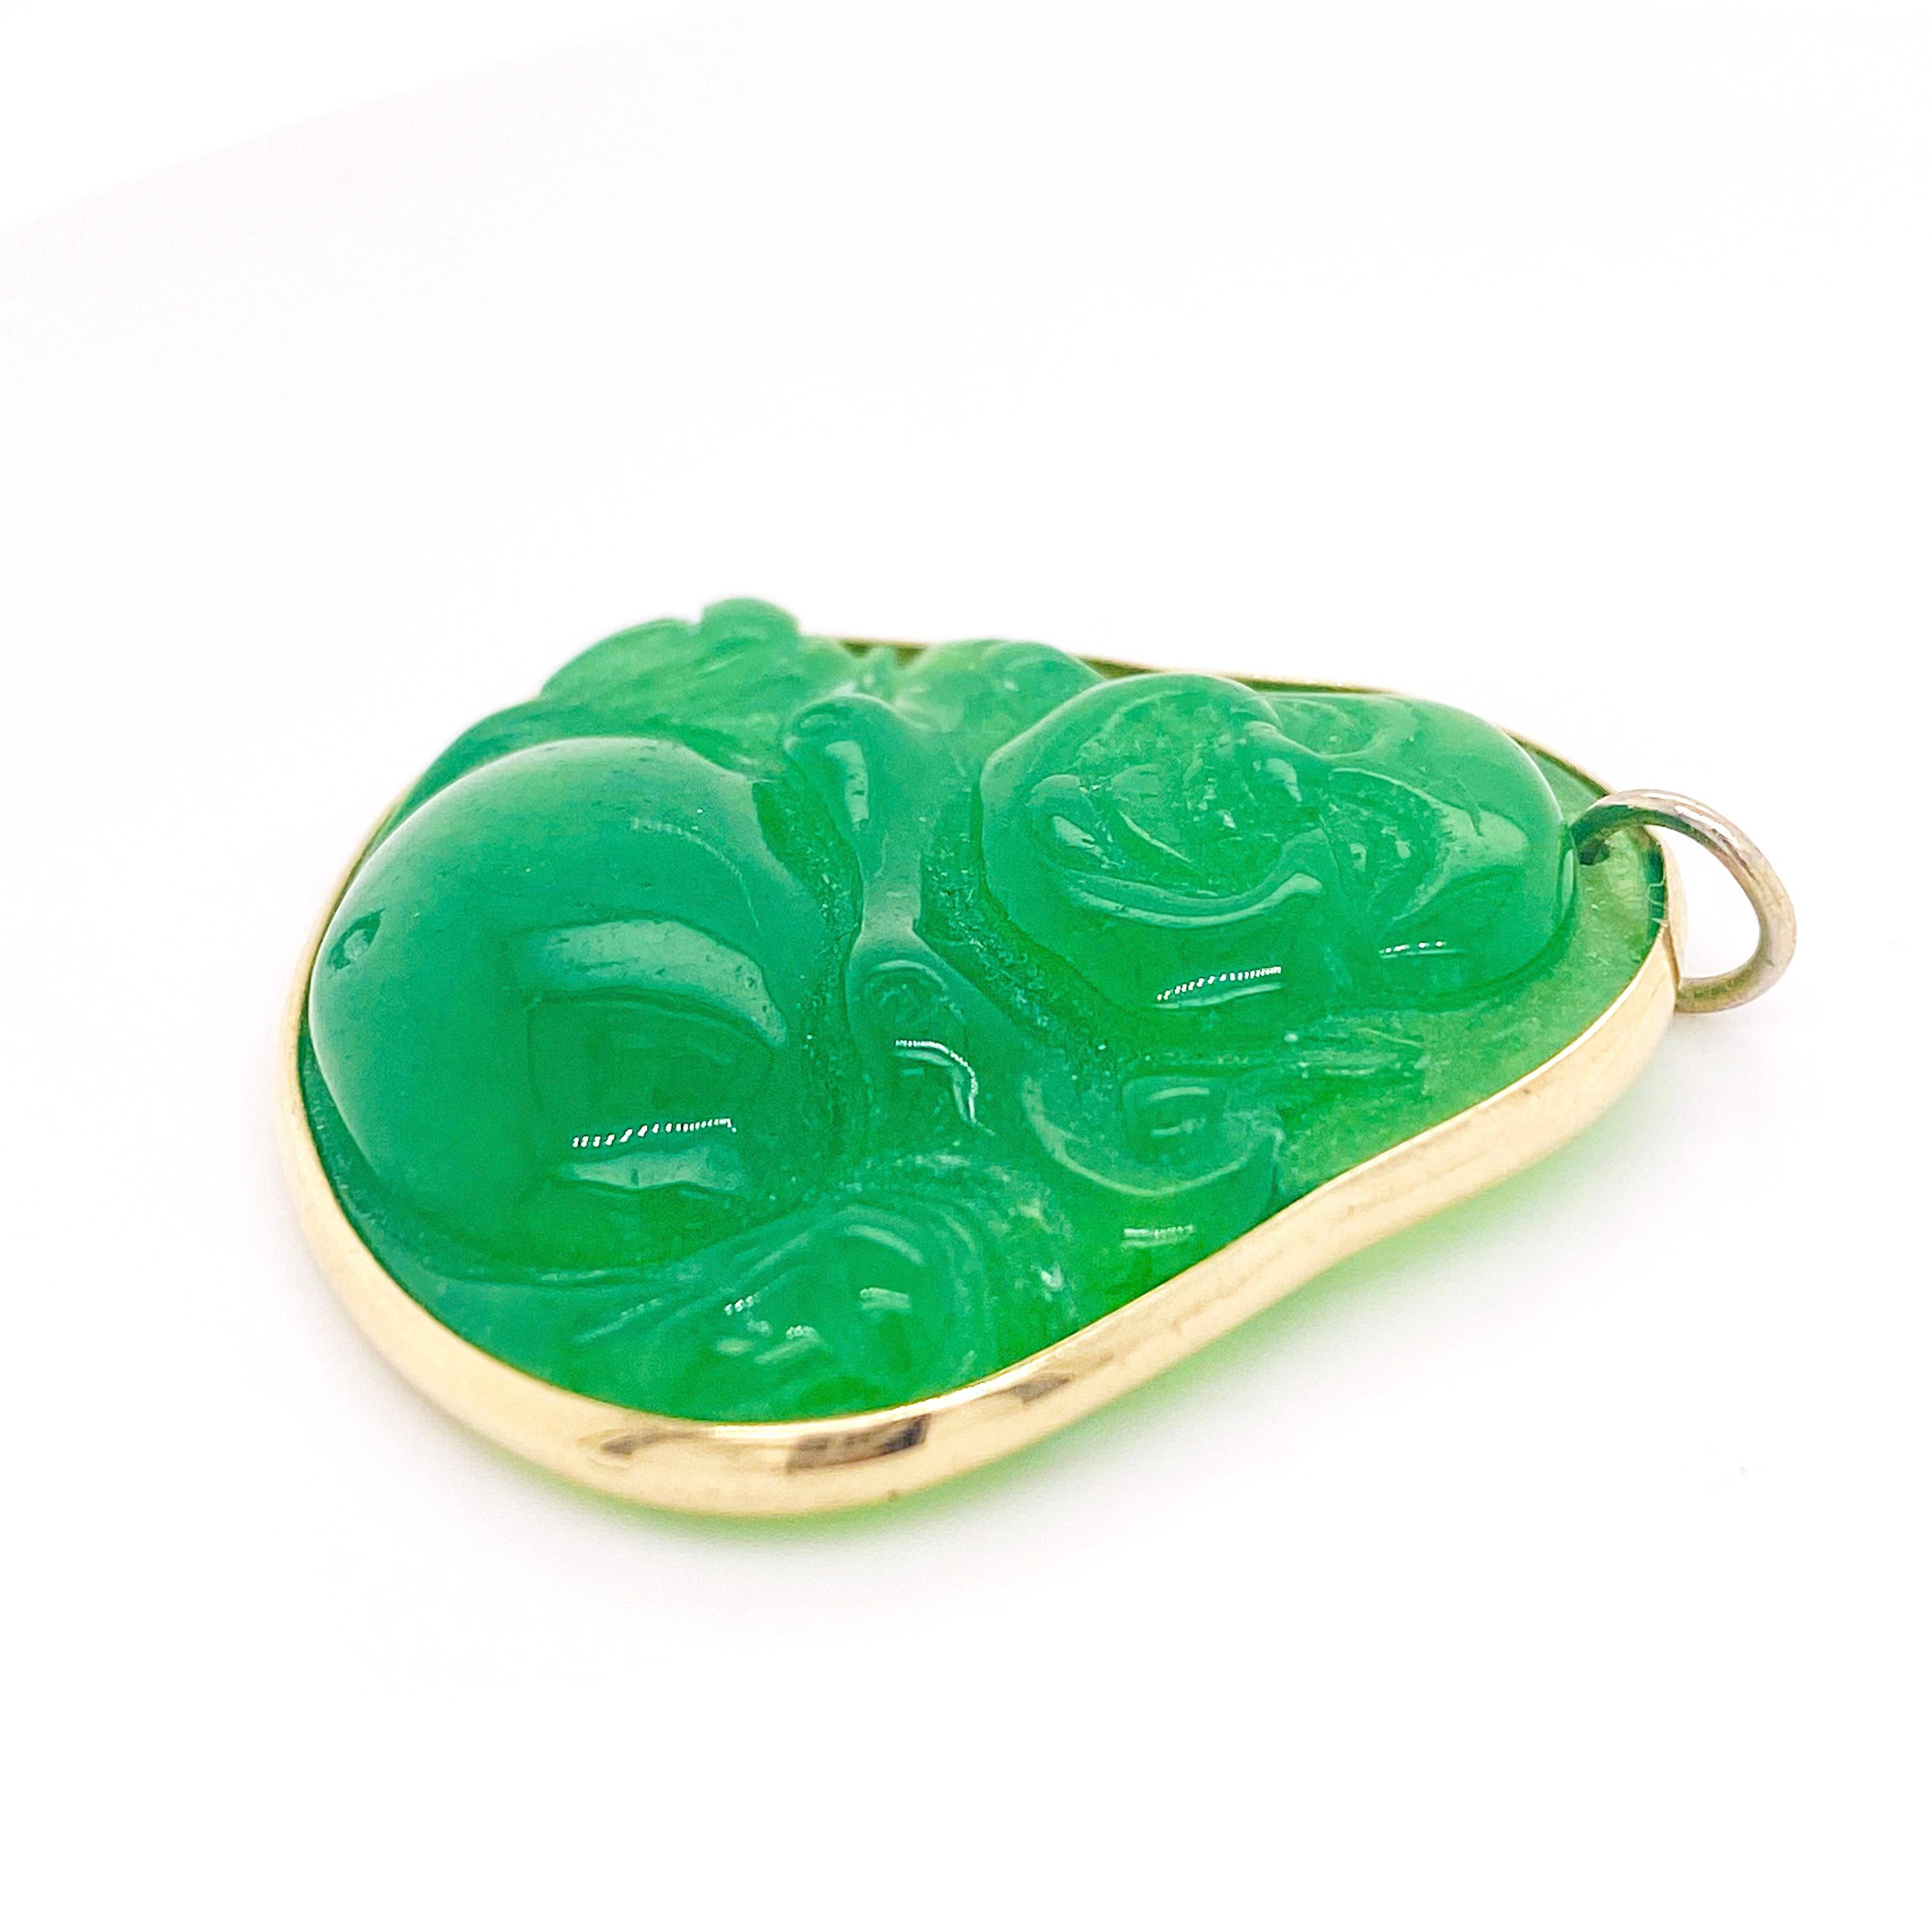 Buddha was a religious leader, a teacher, and a philosopher who sought to reach a state of enlightenment (nirvana). It is fitting that he is engraved into jade because that is the stone that symbolizes wisdom and tranquility. With this pendant, you